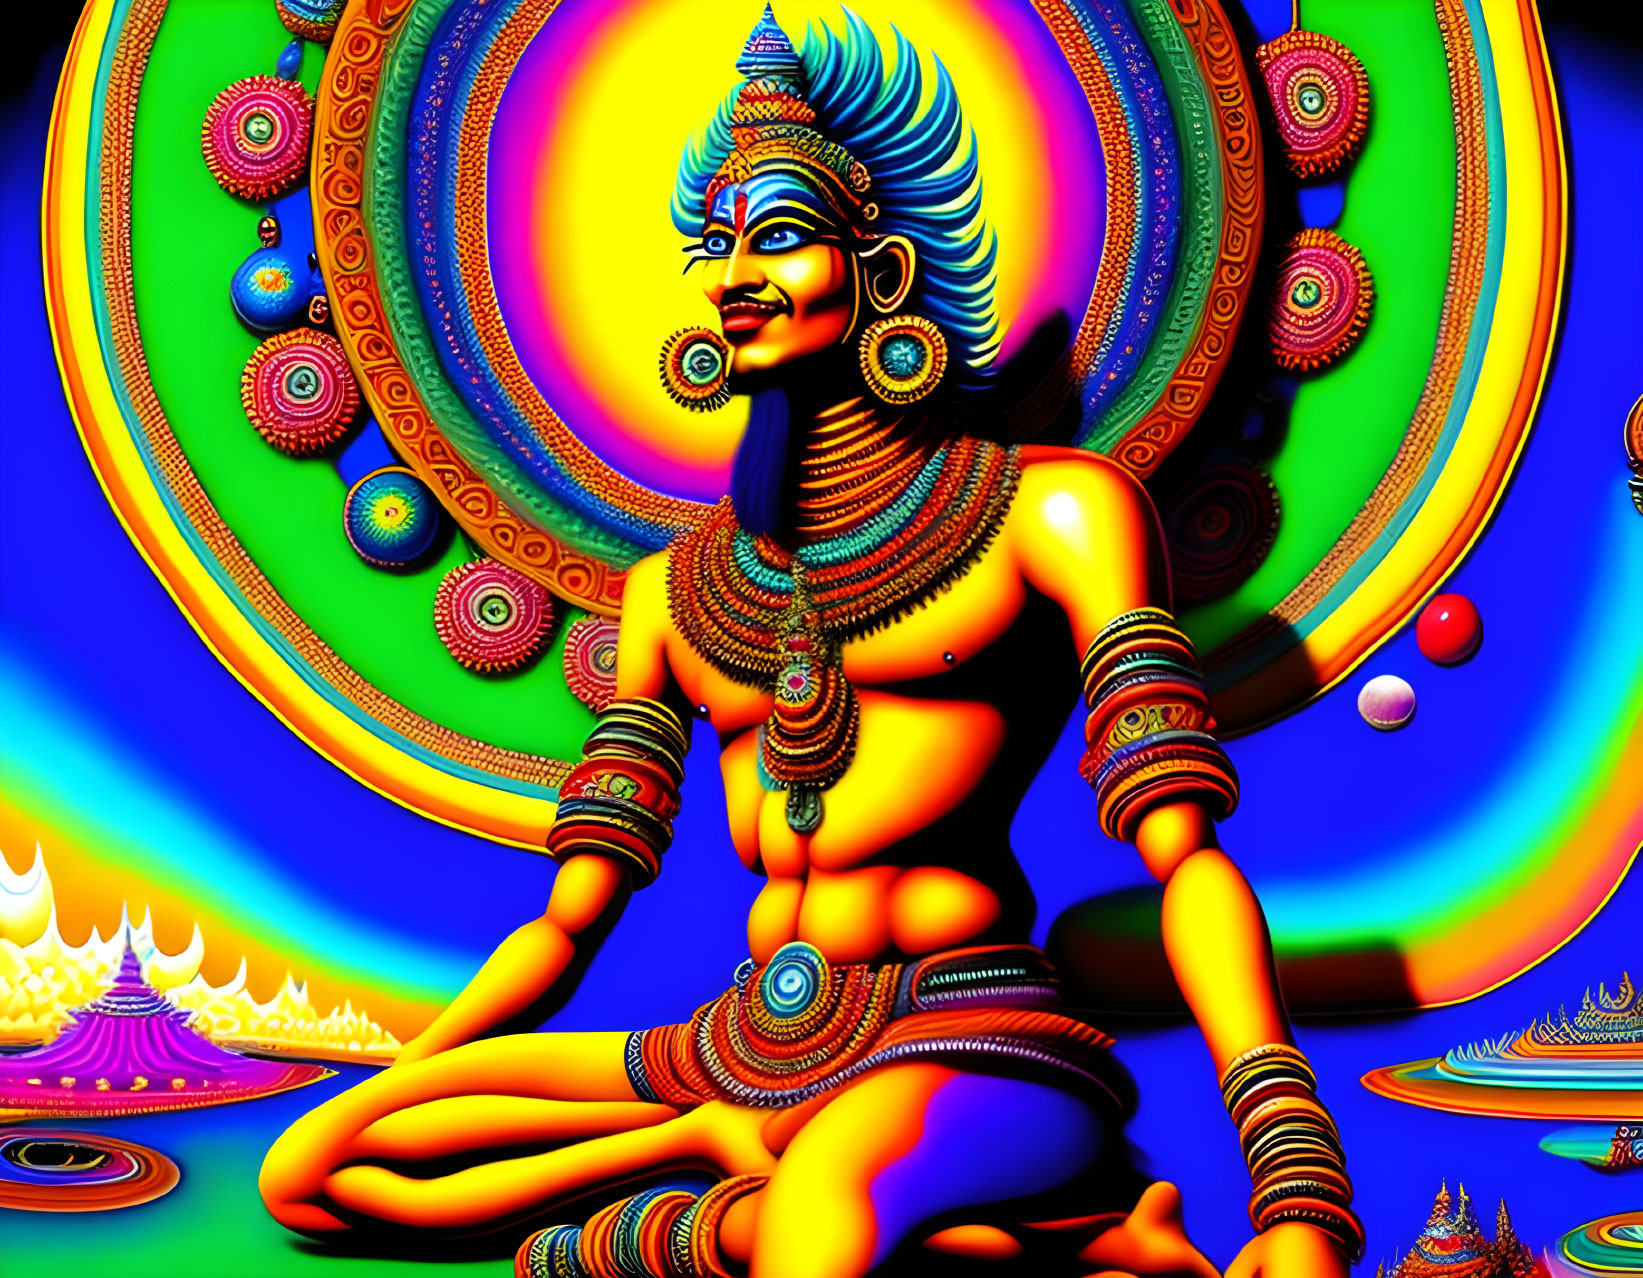 Colorful deity with multiple arms in meditative pose on psychedelic background